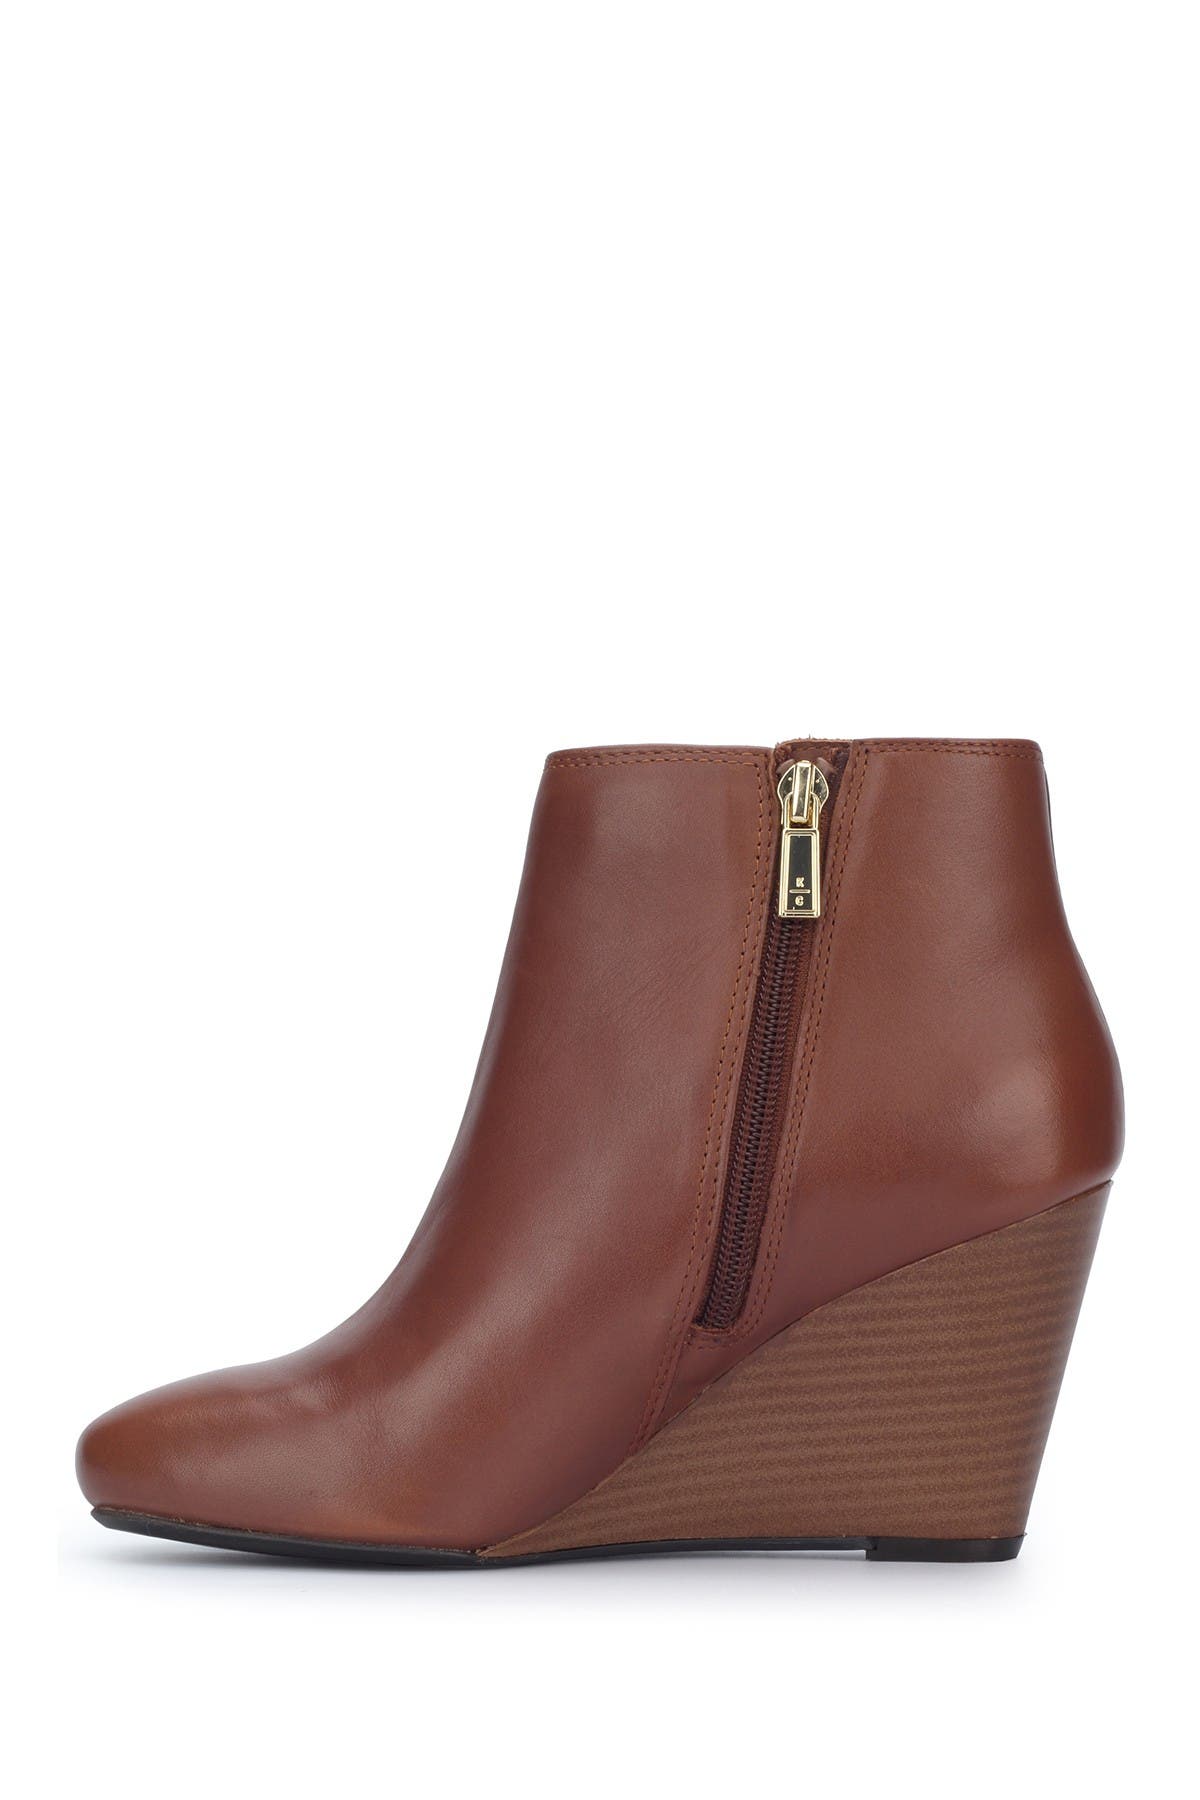 kenneth cole reaction wedge booties